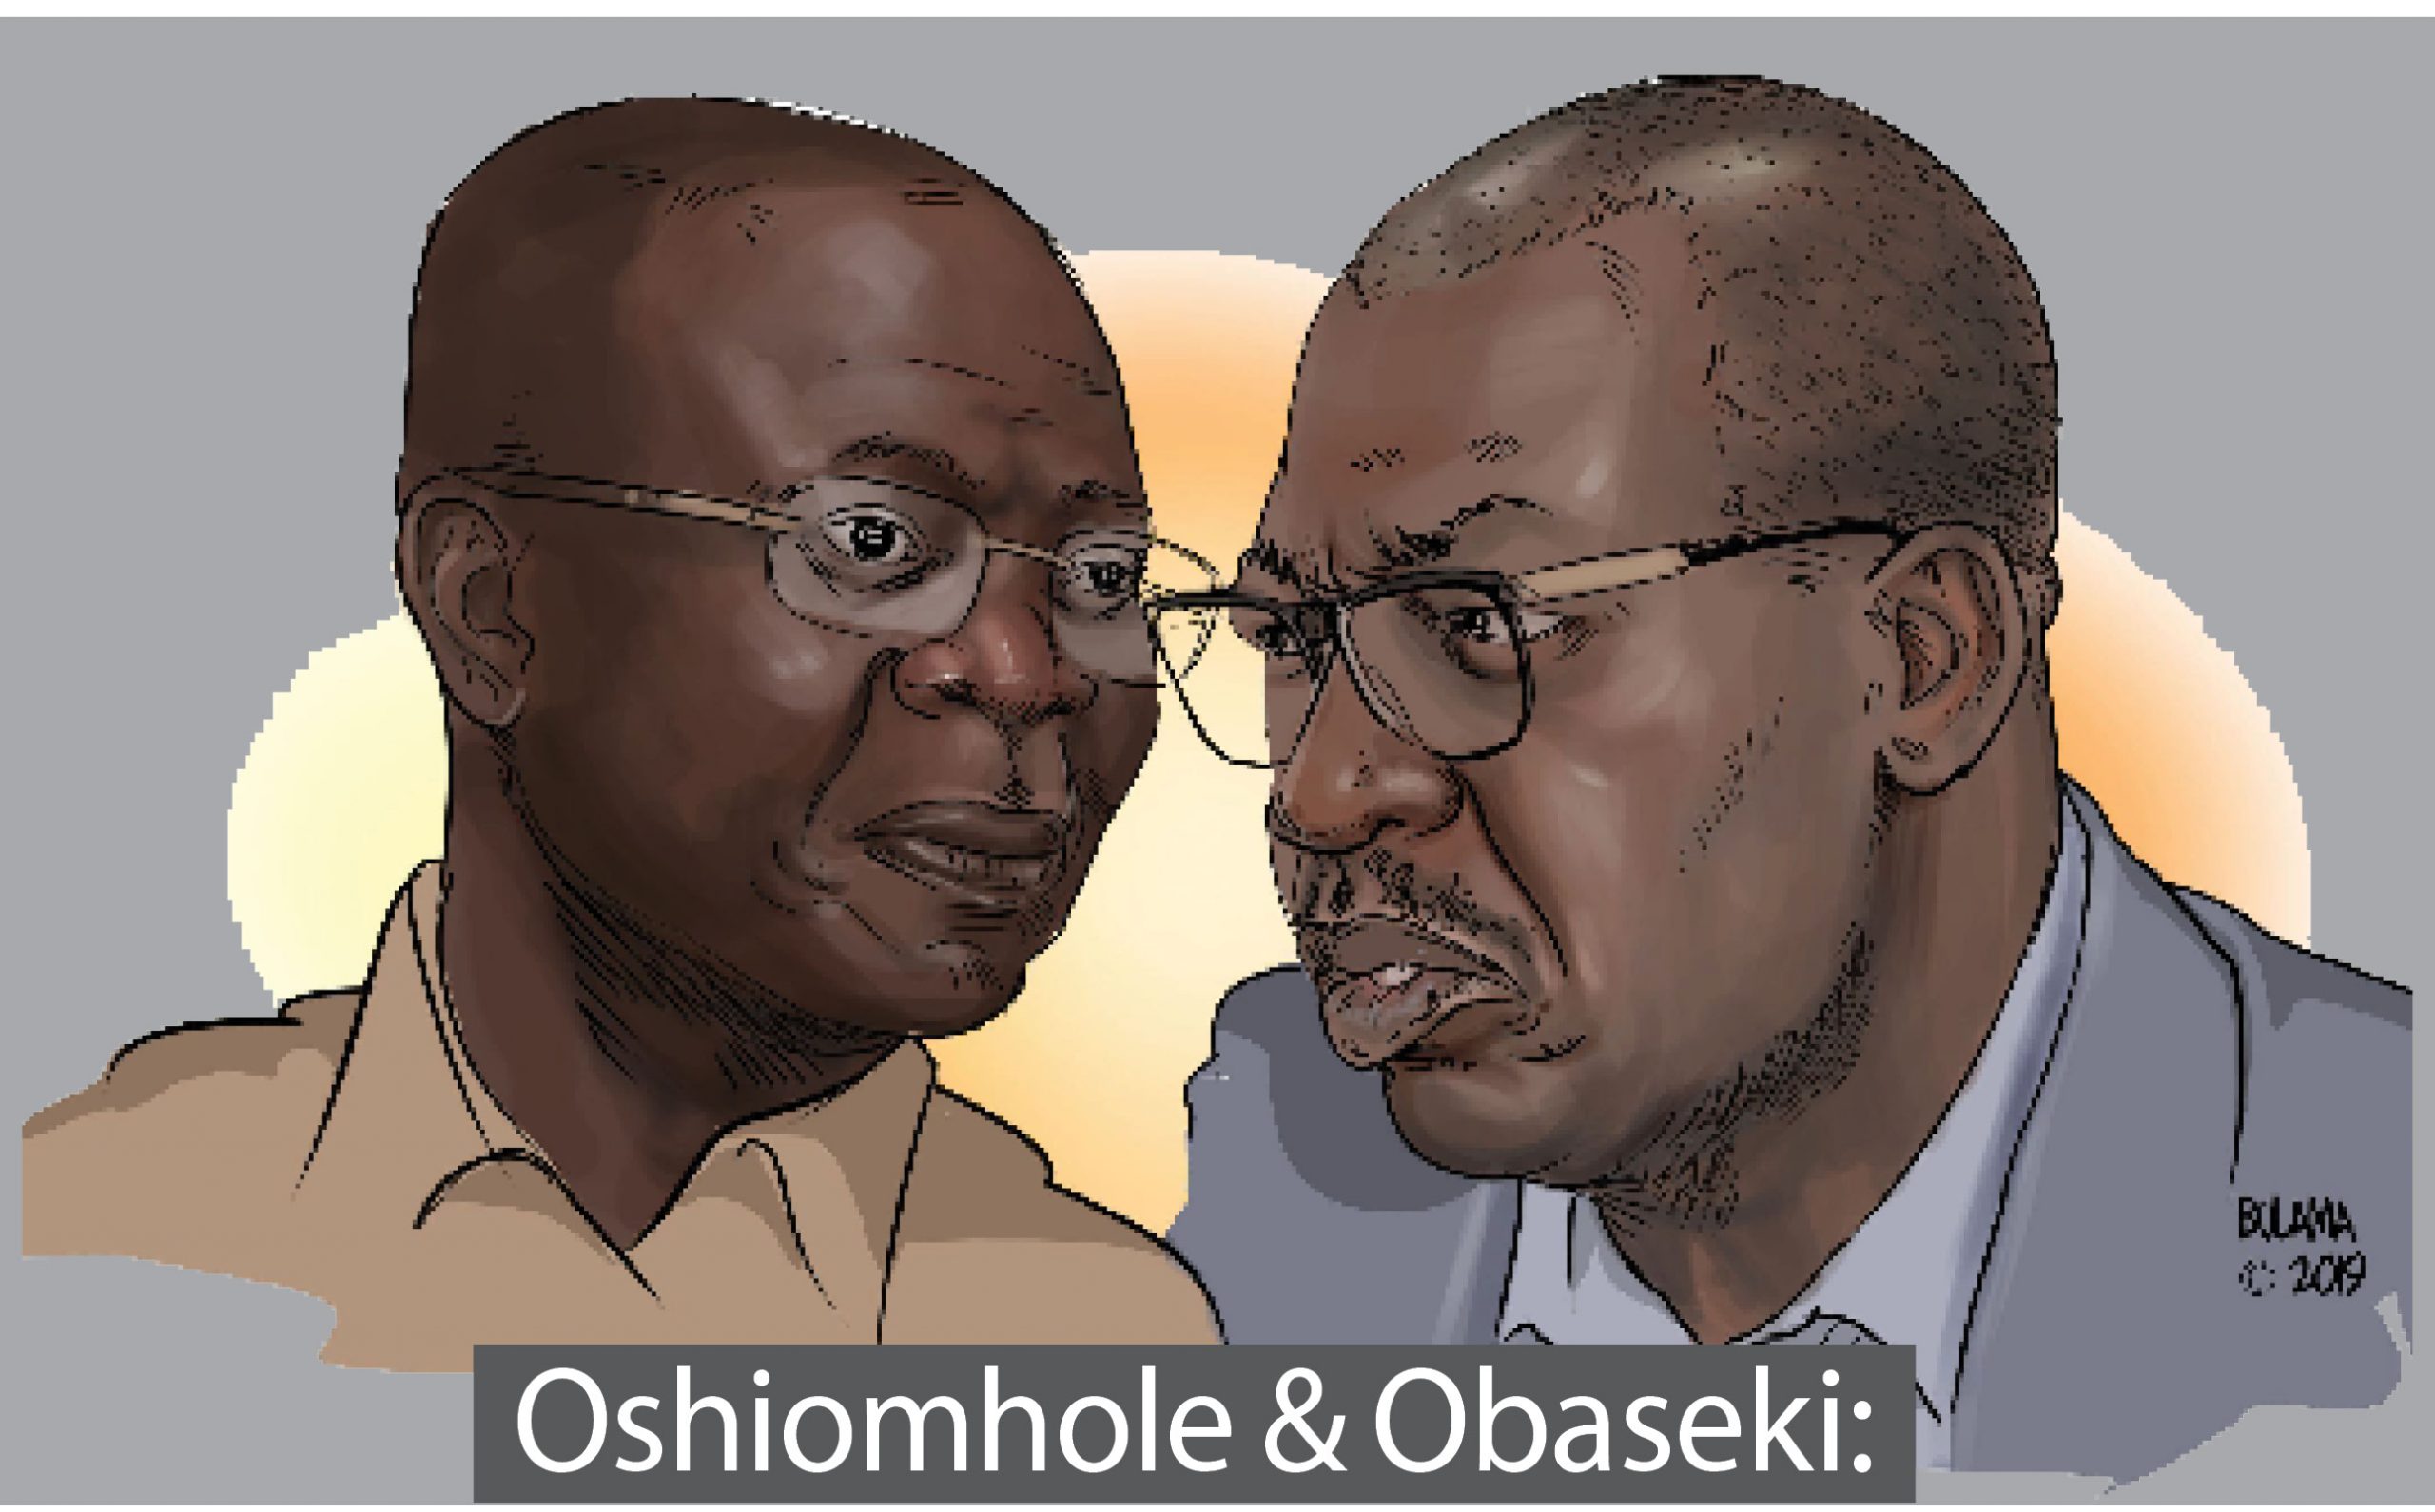  First, Ambode. Now, Obaseki: The price of disloyalty